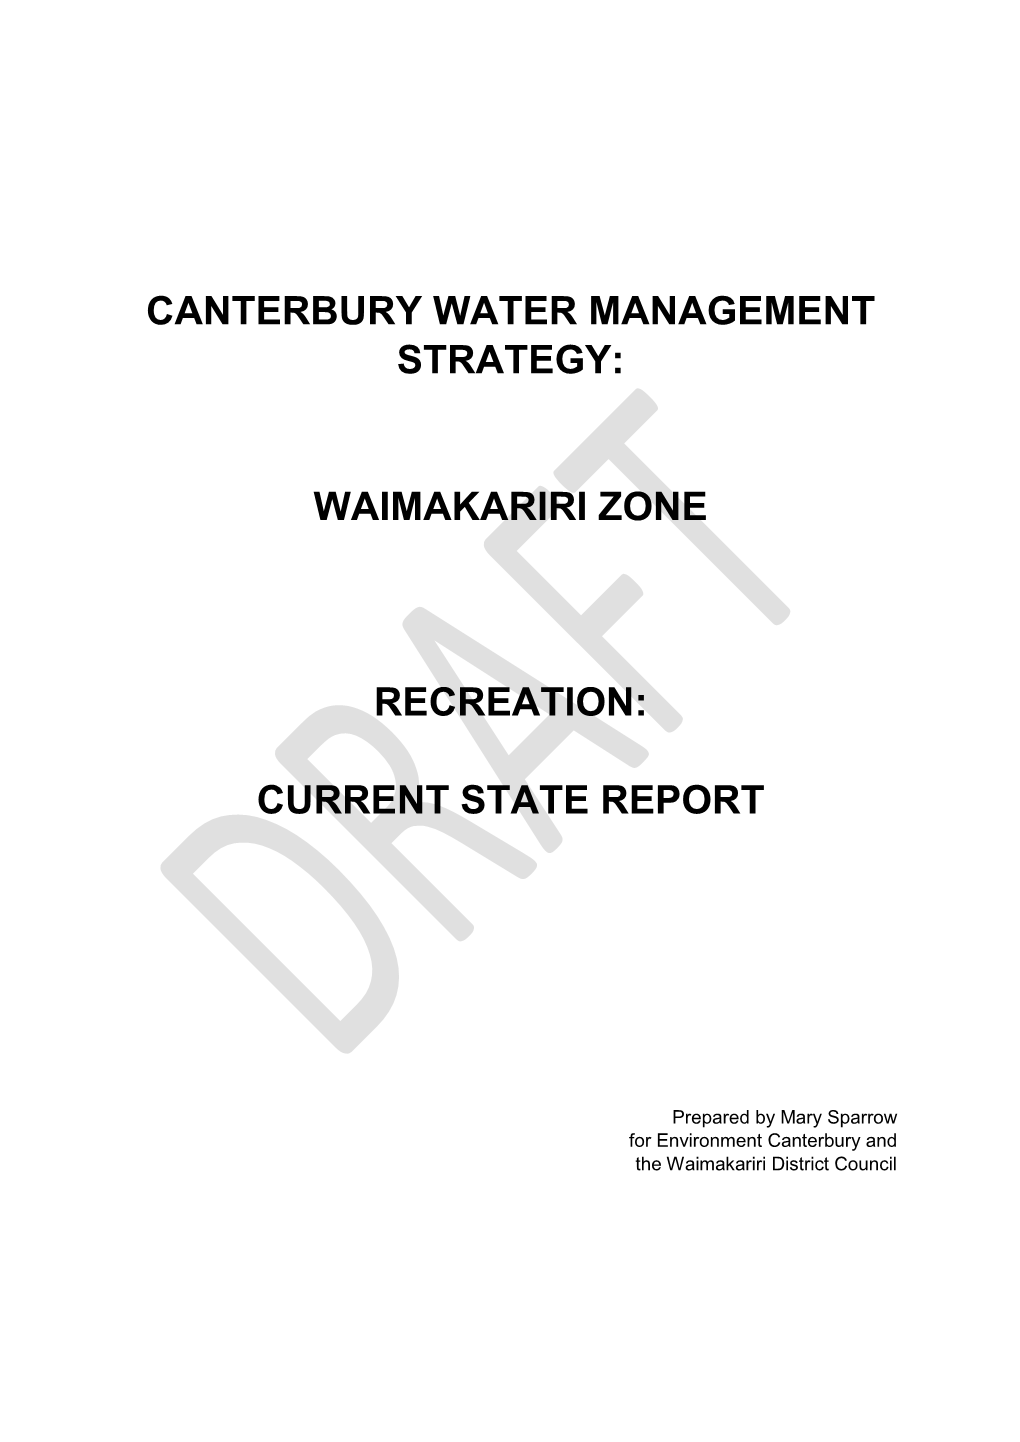 Waimakariri Zone Recreation Profile Prepared by Mary Sparrow for Ecan and WDC